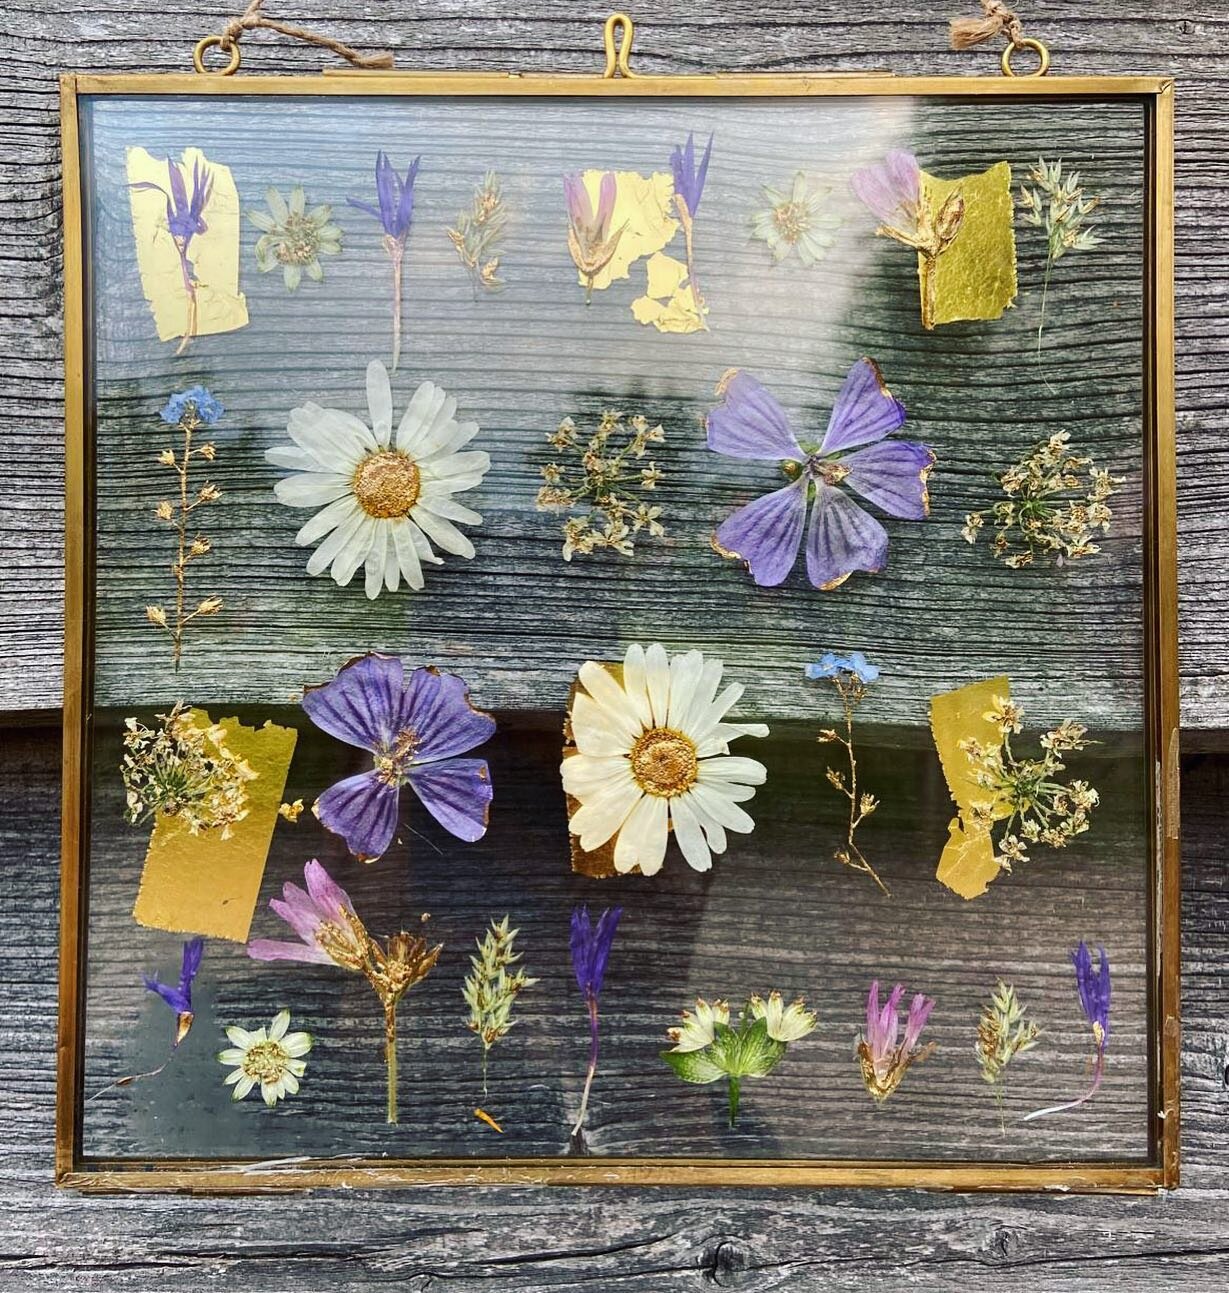 ✨Gilded Pressed Flower Frame LXXXX✨First market in a while tomorrow! I&rsquo;ll be back @salusburysundaymarket from 10-2 tomorrow. I&rsquo;ll be bringing some new works as well as my wrapping paper and notebooks. Can&rsquo;t wait to be back with fell